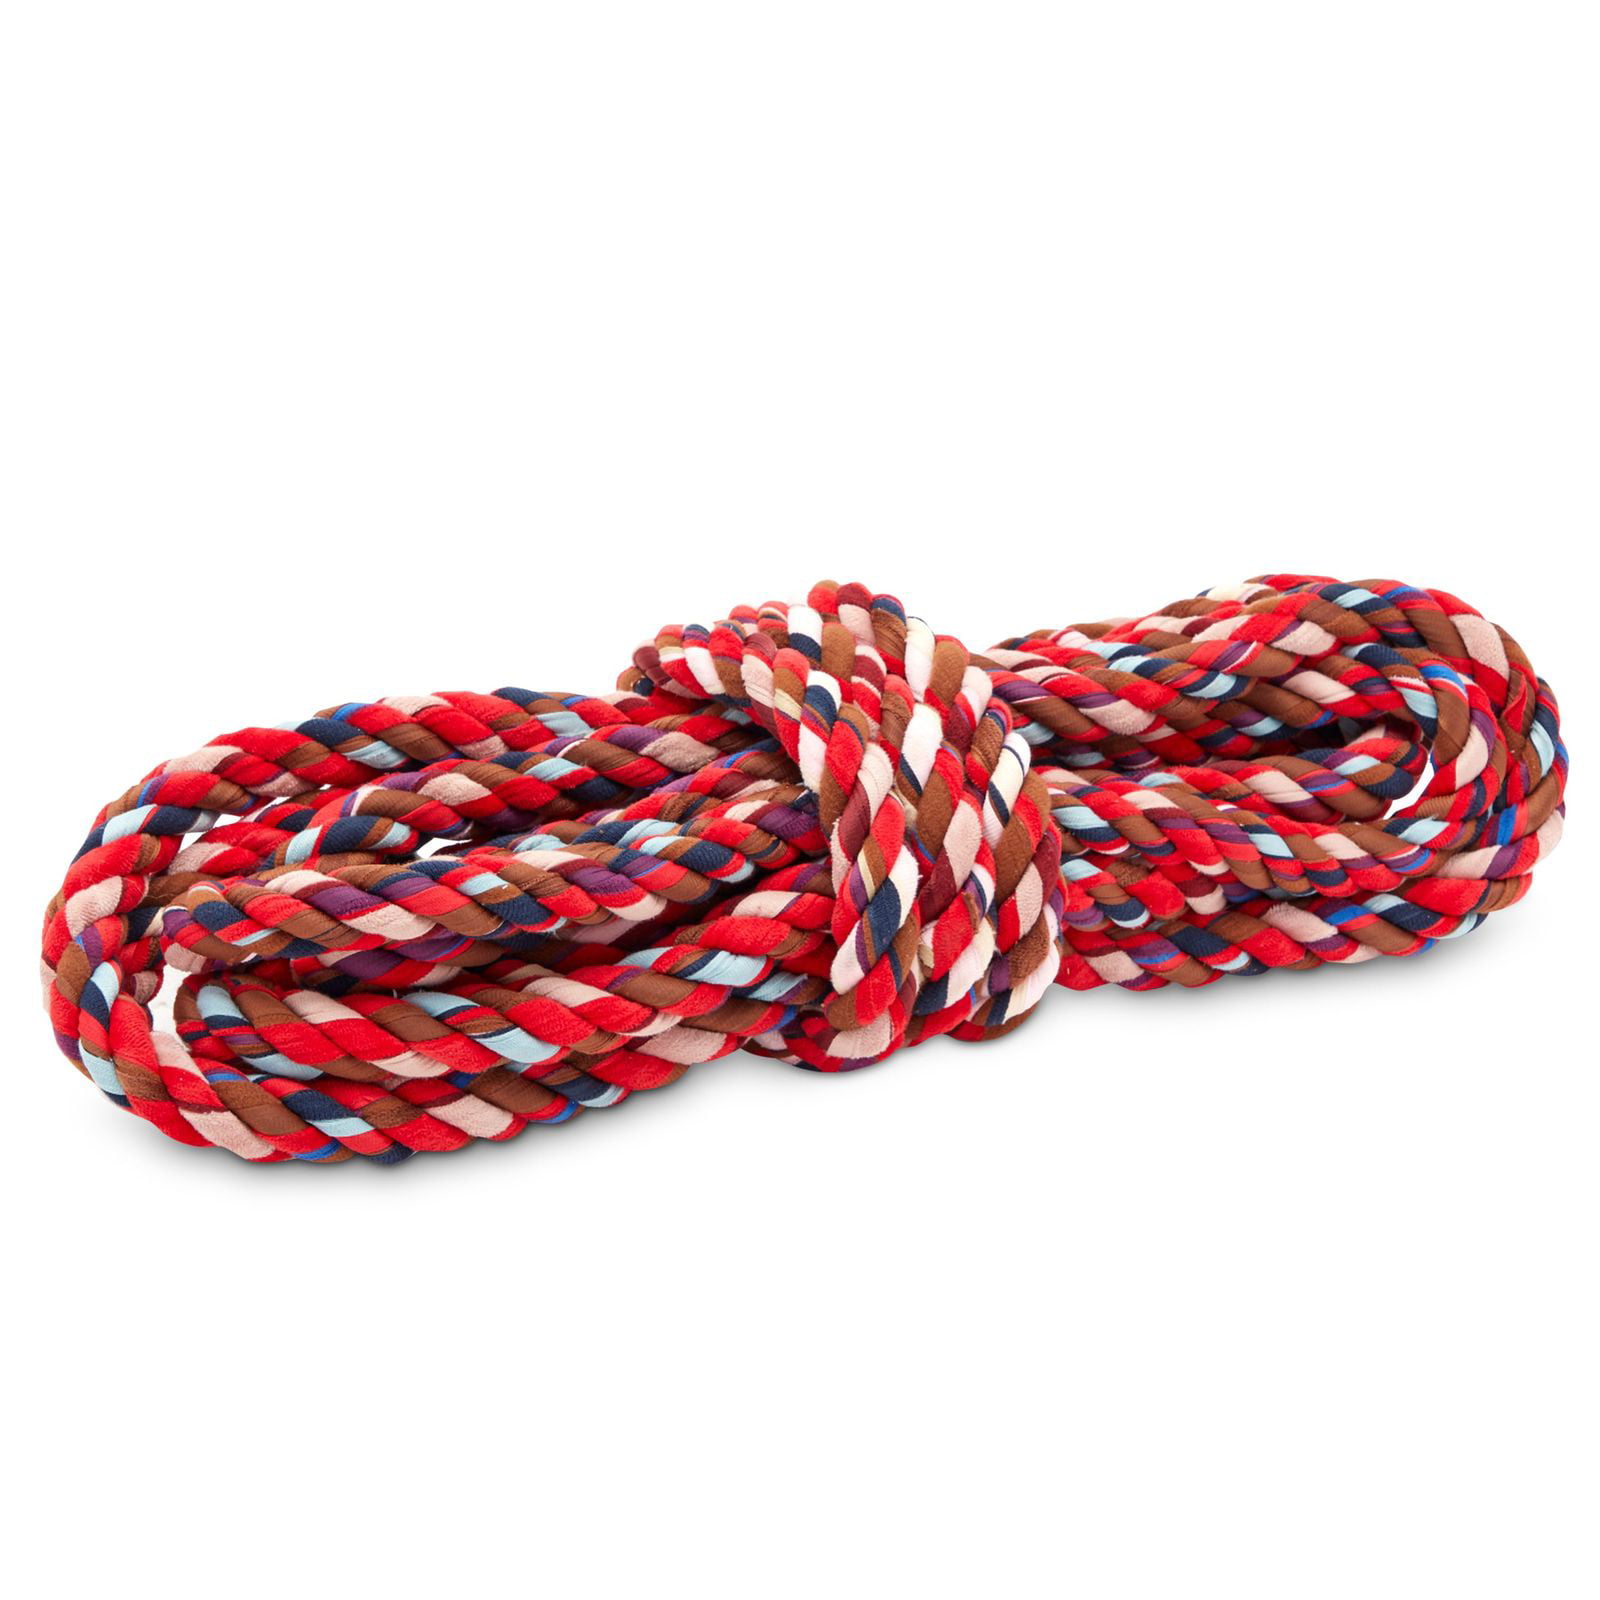 WORKOUTZ 50FT POLYESTER TUG OF WAR ROPE WITH CENTER FLAG AND LOOPED ENDS 